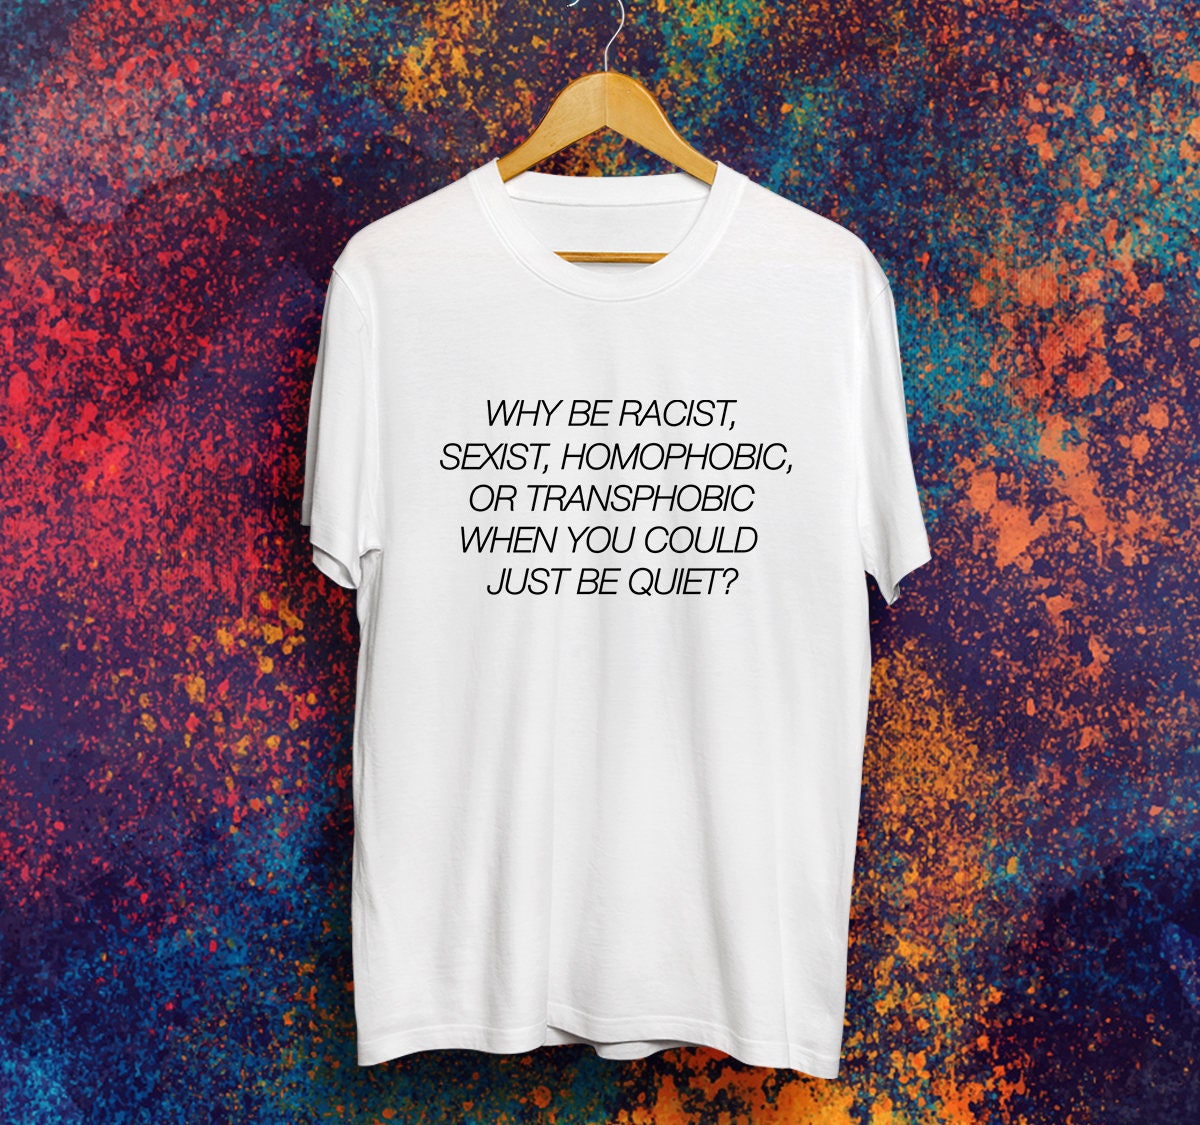 Why be racist shirt Frank Ocean t-shirt Anti Discrimintaion